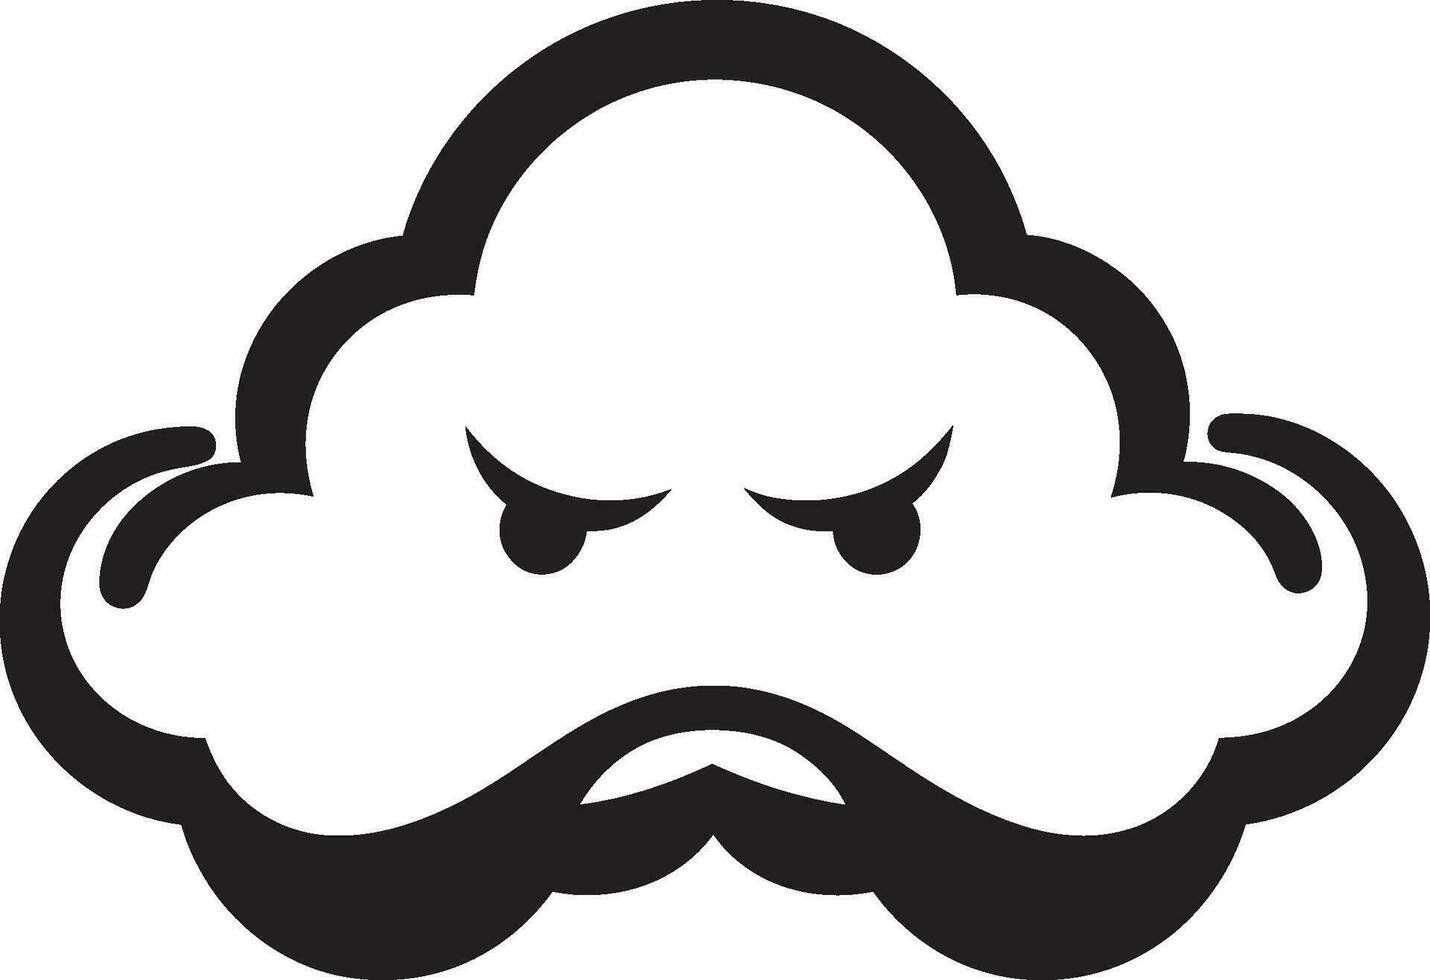 Furious Cyclone Black Angry Cloud Character Stormy Vortex Angry Cartoon Cloud Icon vector